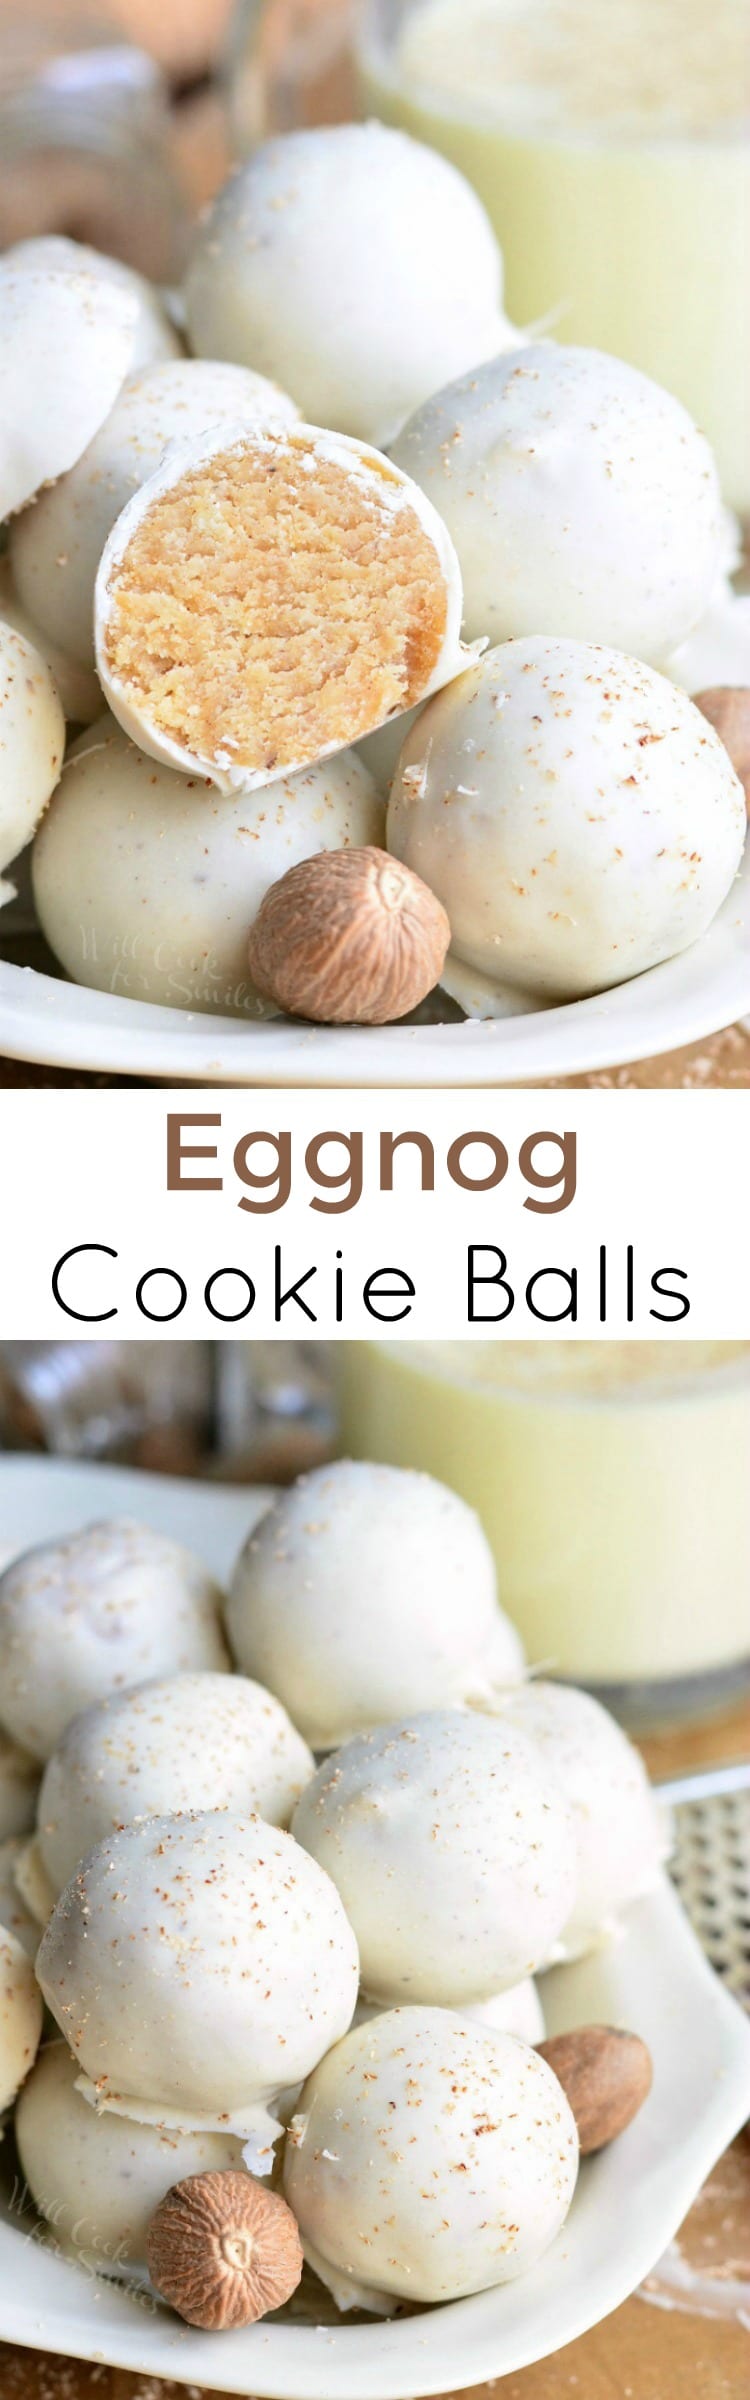 Eggnog Cookie Balls in a white bowl collage 